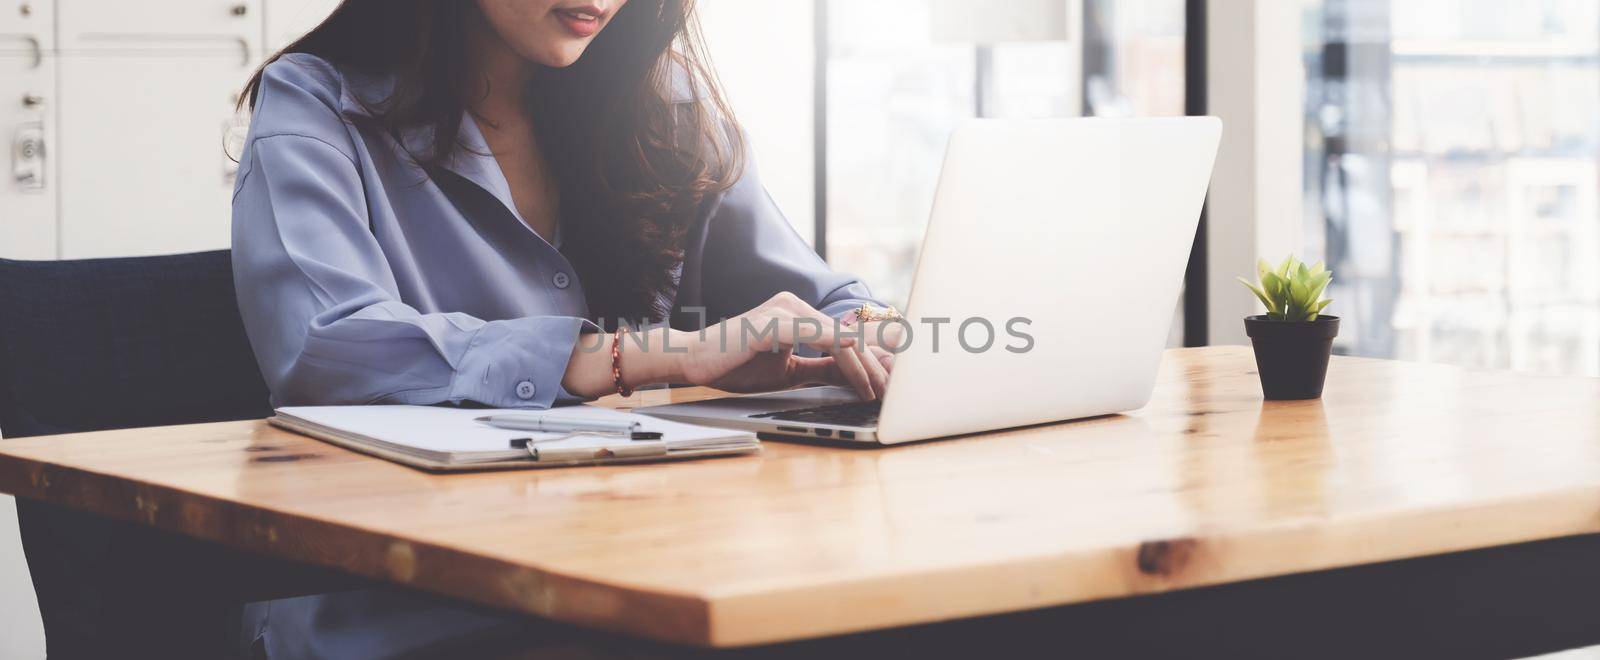 Fund managers researching and analysis Investment stock market by laptop computer